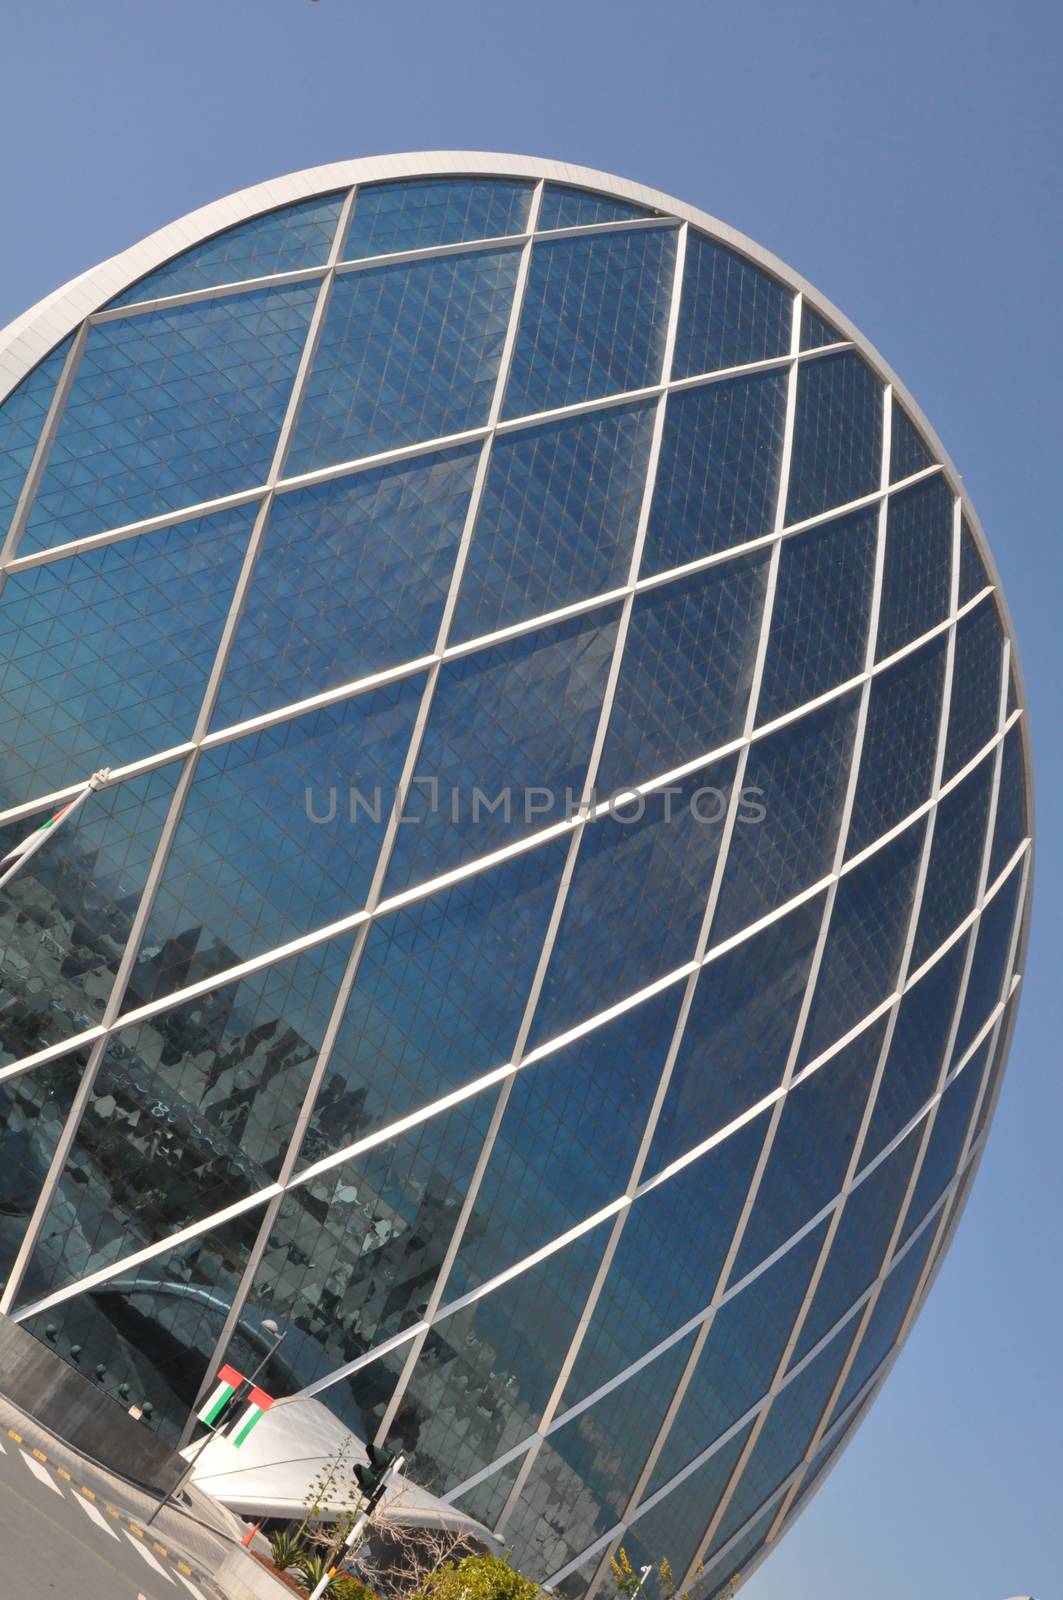 Aldar Headquarters Building in Abu Dhabi, UAE. It is the first circular building of its kind in the Middle East.